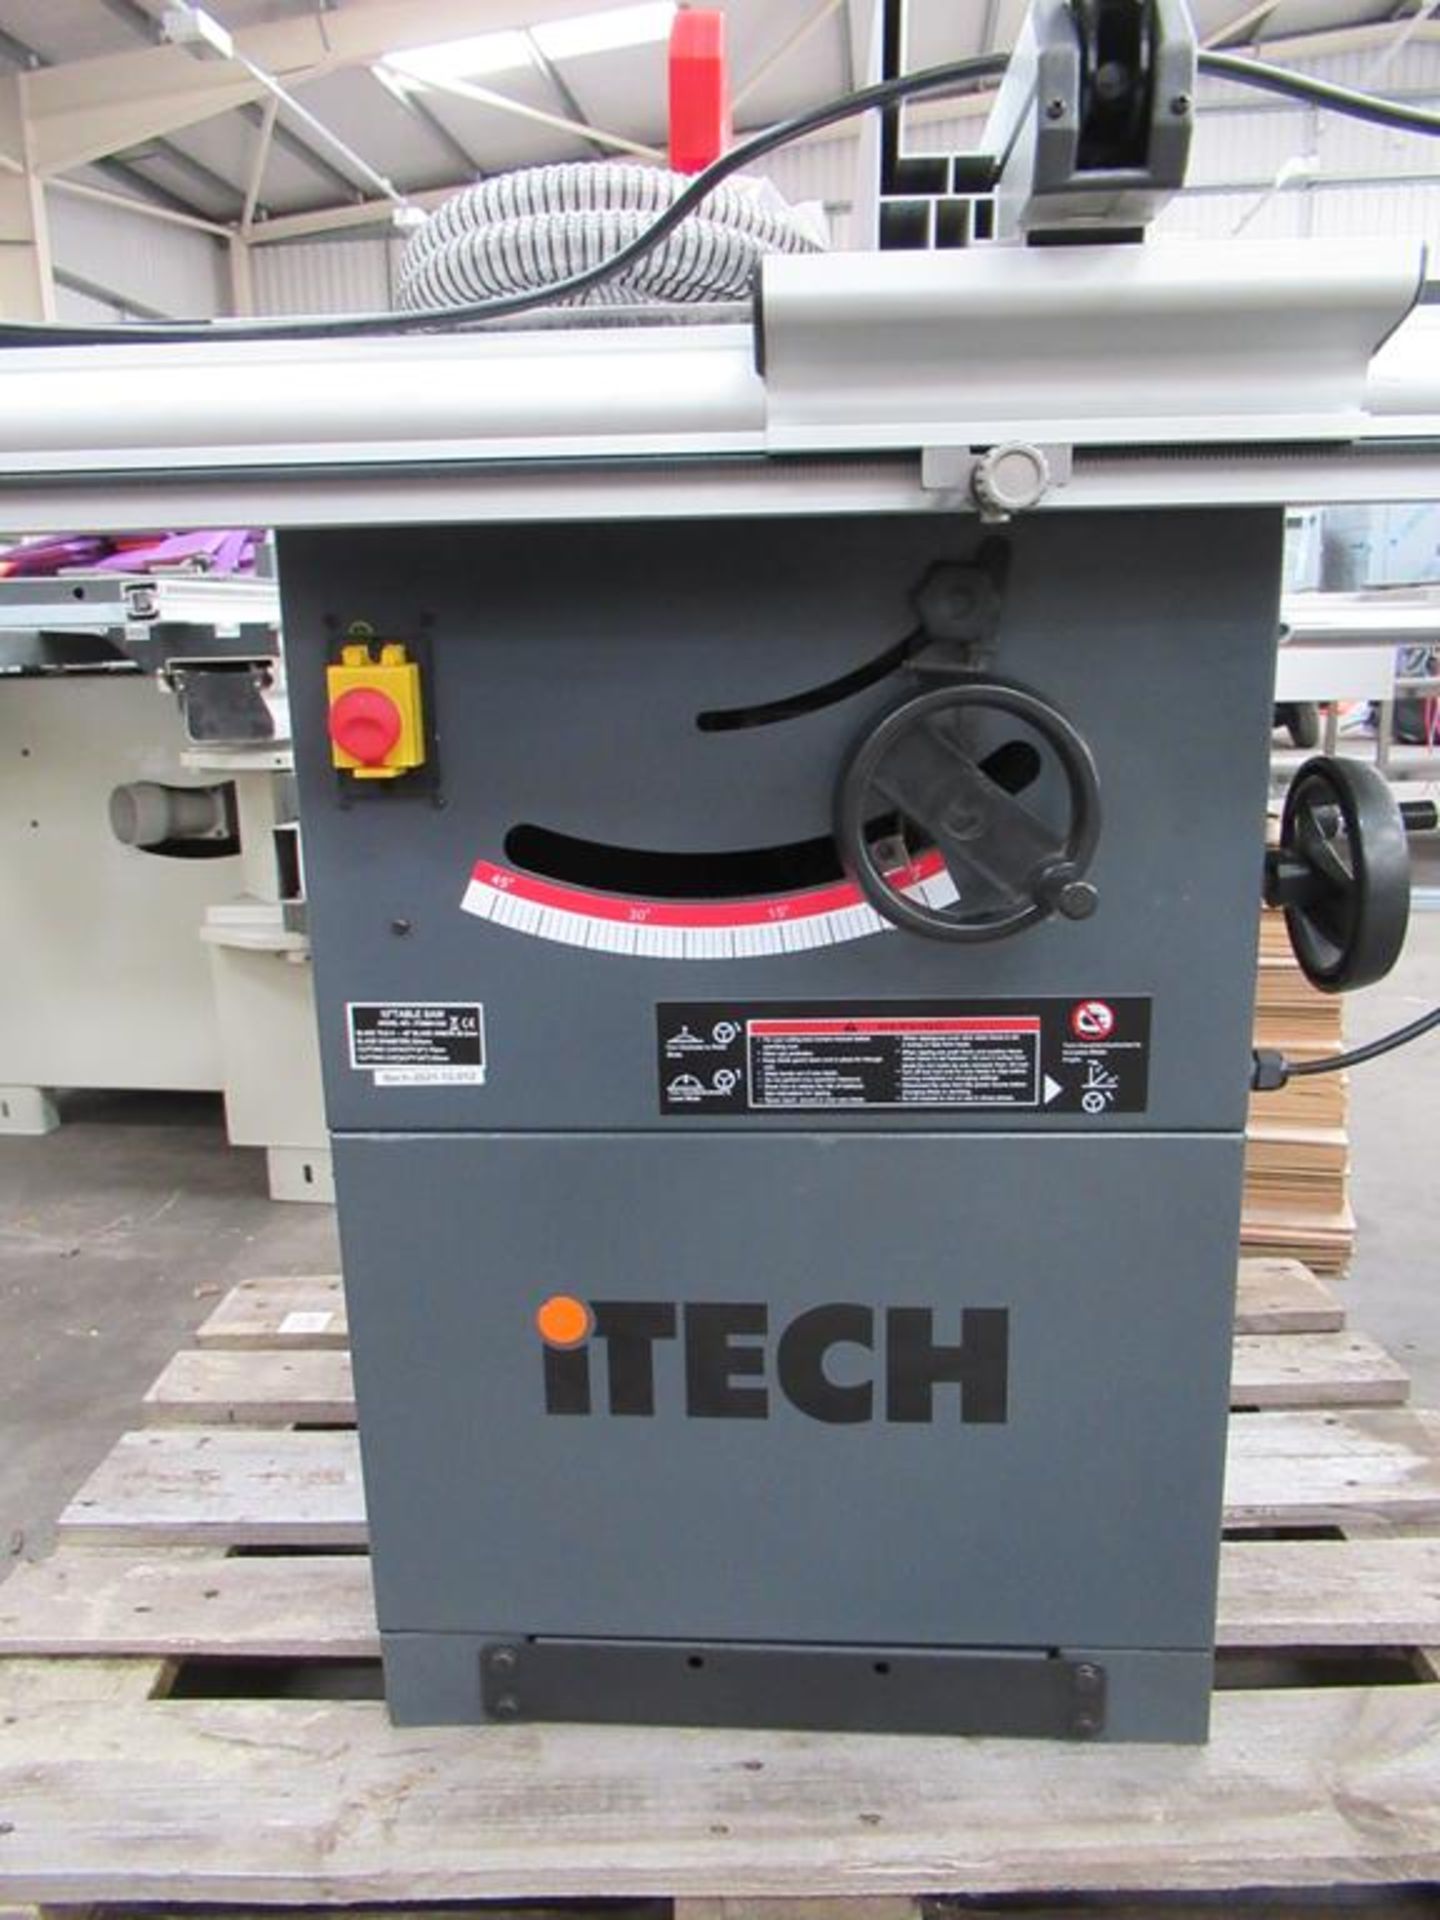 iTech 10" table saw model ITWM01332, 240V - Image 2 of 5